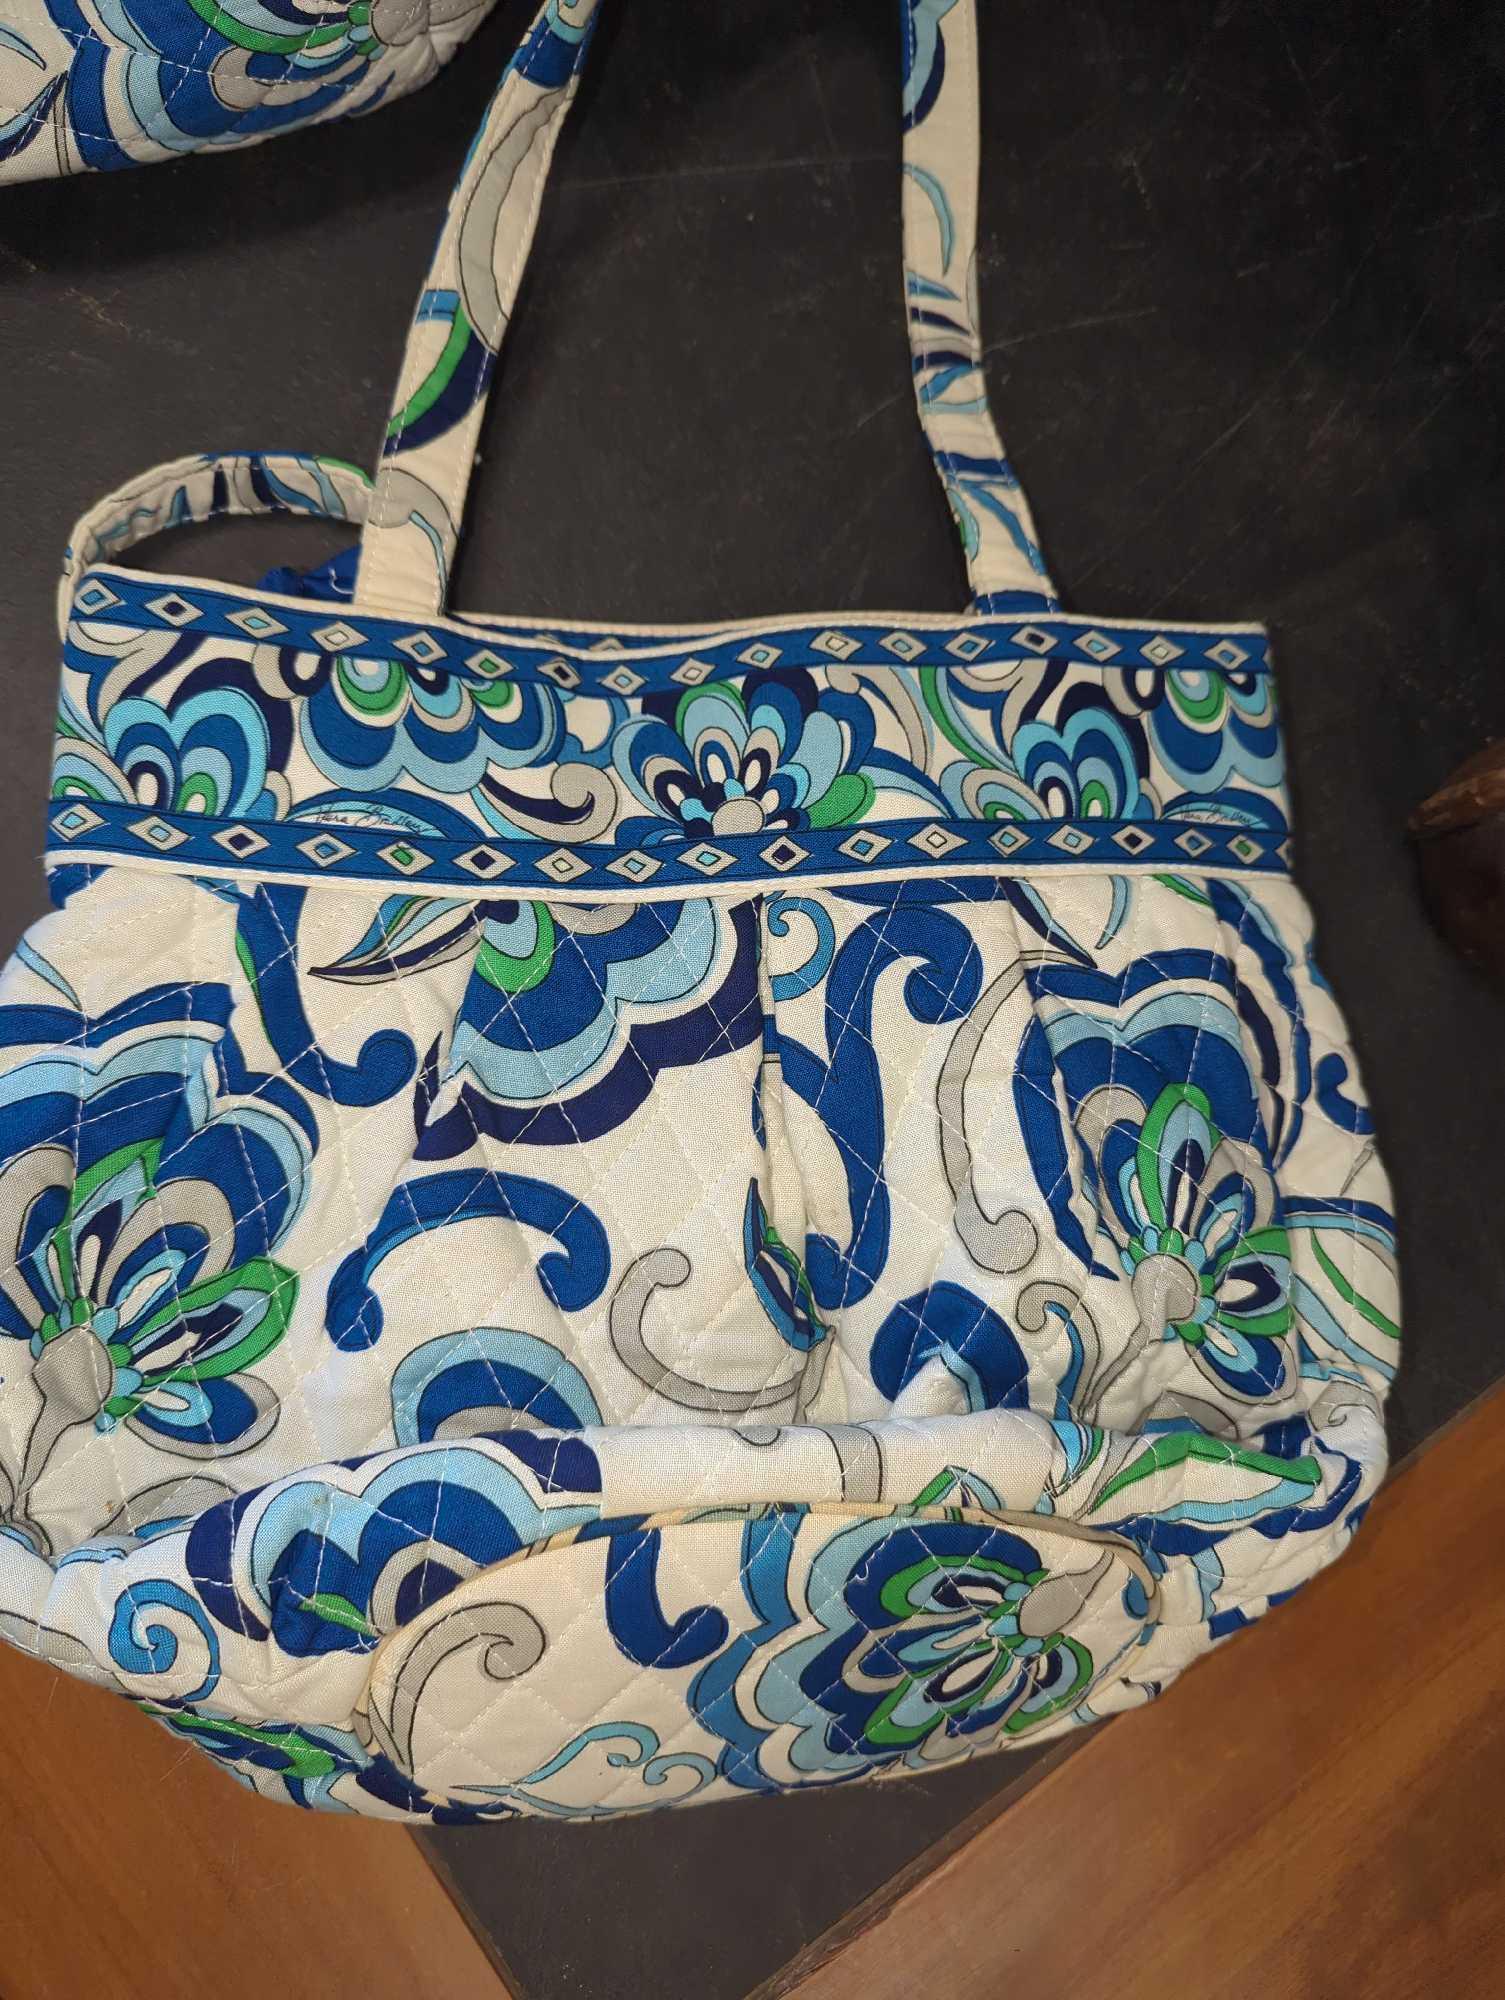 Lot of 3 Vera Bradley Betsy Mediterranean Pattern Handbags, All 3 Appear Lightly Used, What You See